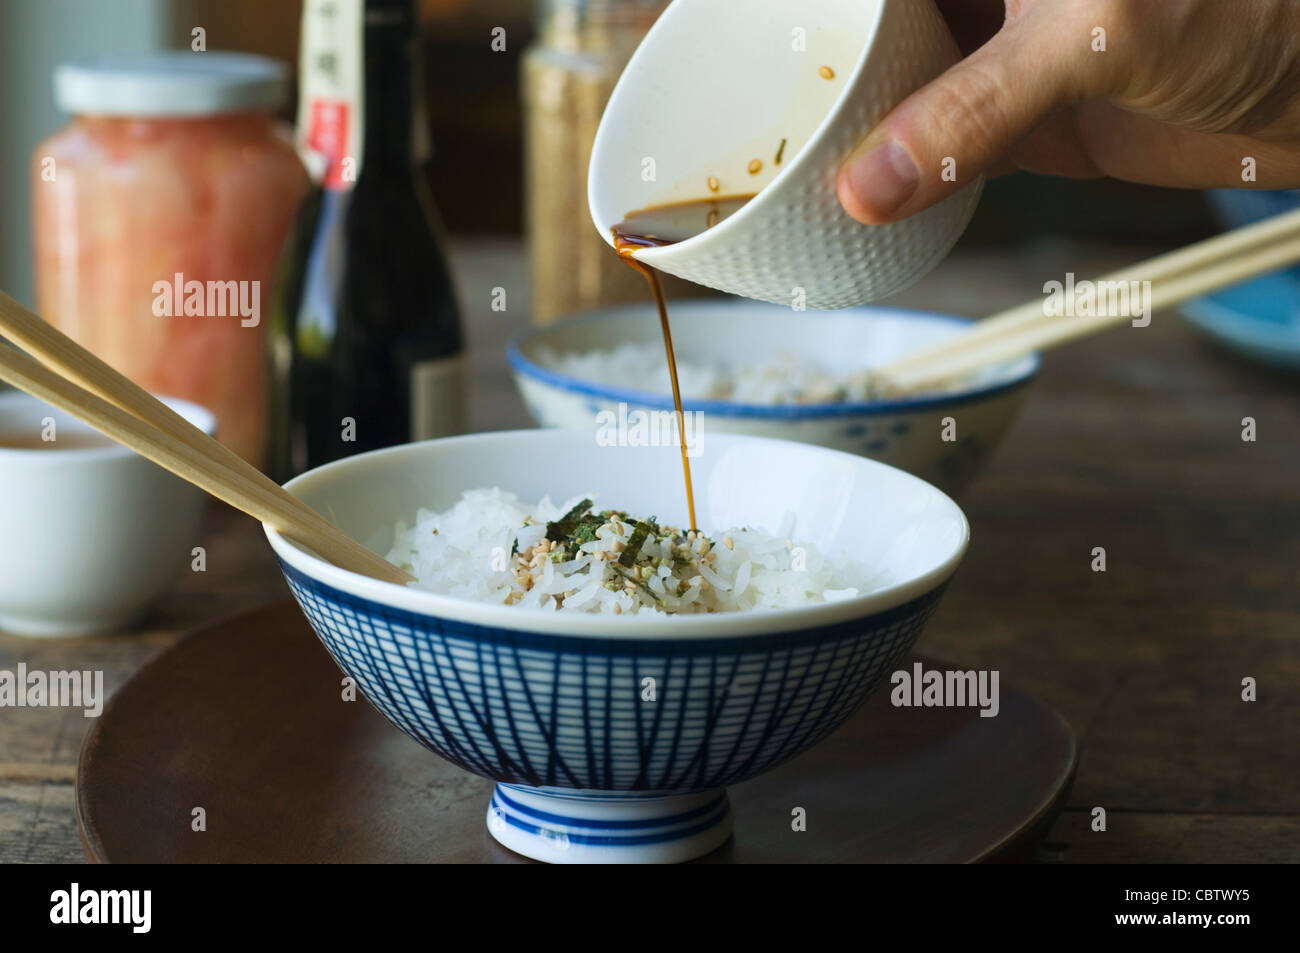 Person pouring sauce over bowl of rice Stock Photo